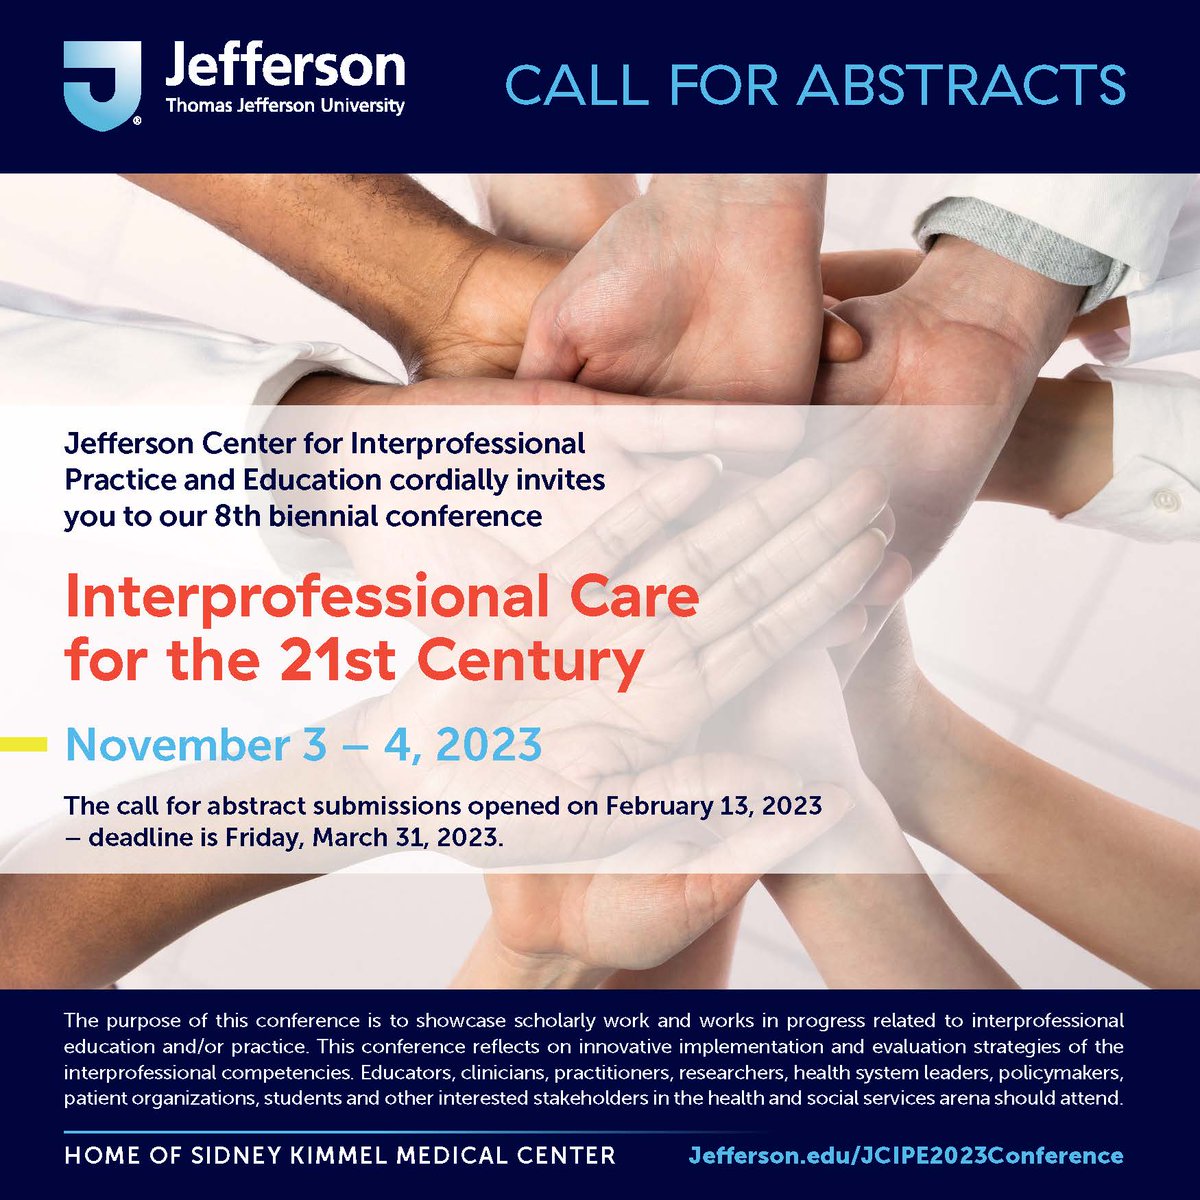 📢📢Submit your abstract for the JCIPE biennial conference: Interprofessional Care for the 21st Century! Deadline is March 31, 2023. Visit our website jefferson.edu/JCIPE2023Confe… for more information!📢📢 #jcipe #interprofessionaleducation #interprofessionalcollaboration #conference